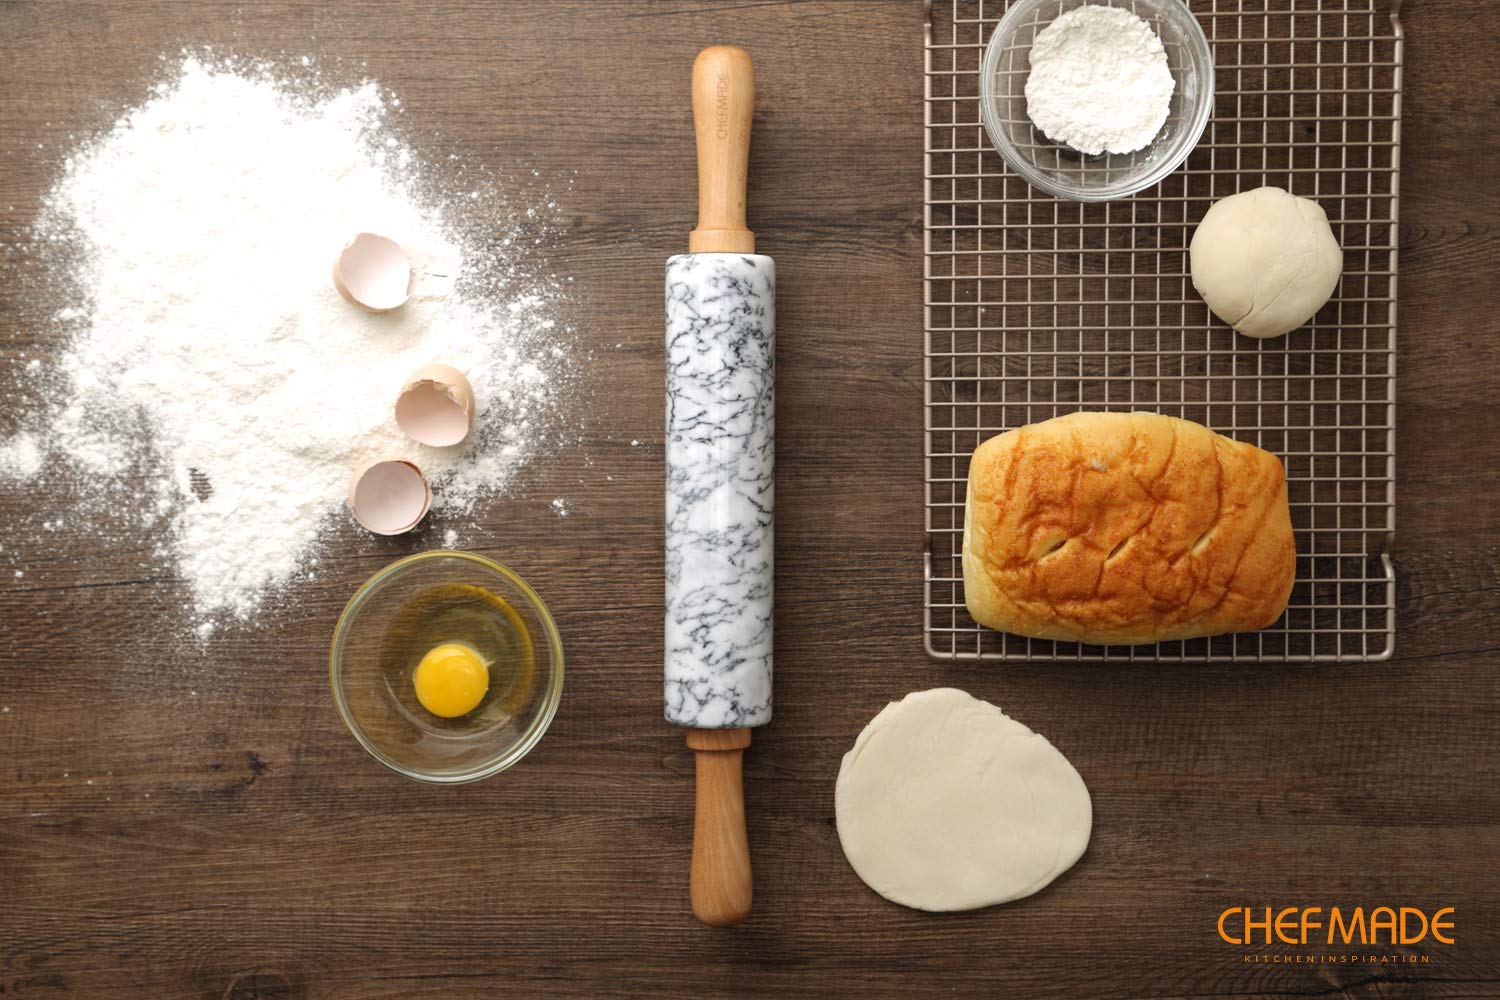 CHEFMADE 18-Inch Marble Rolling Pin with Wooden Handles and Cradle, Non-Stick (Gray and White)